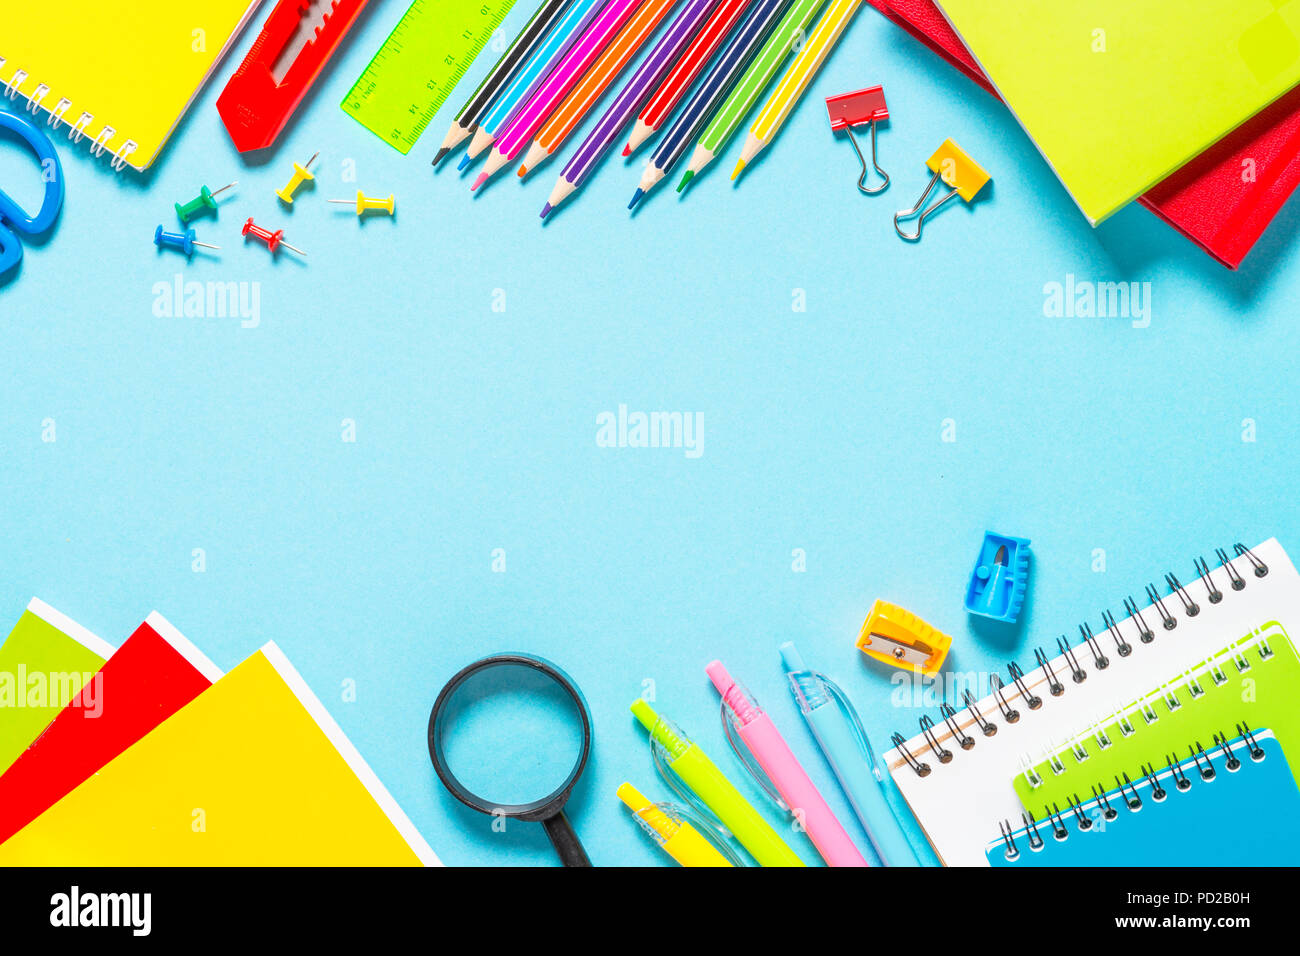 School and office supplies on blue background. Stock Photo